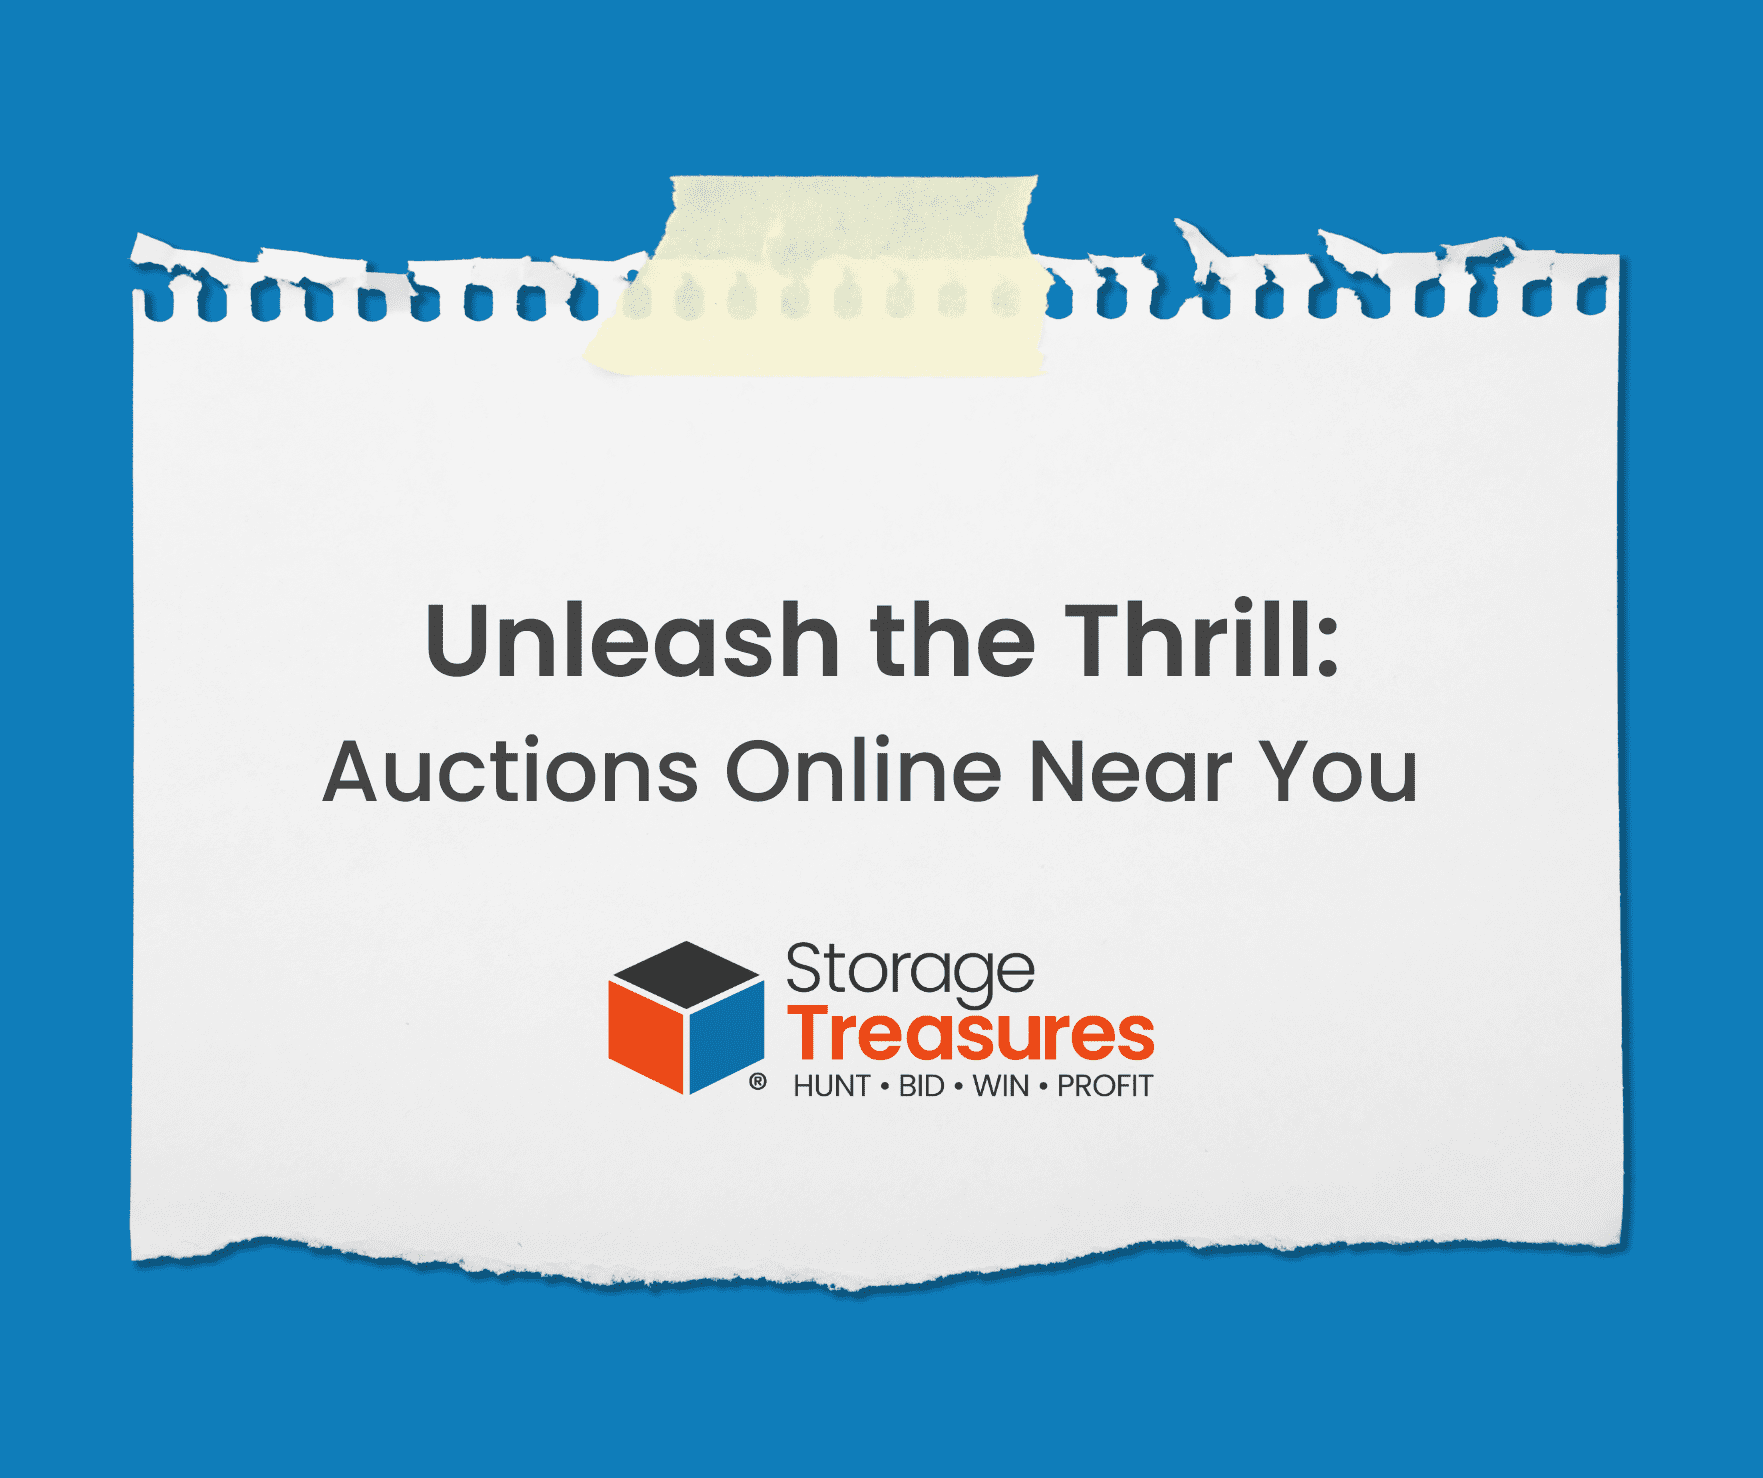 Find treasures in storage auctions near you.